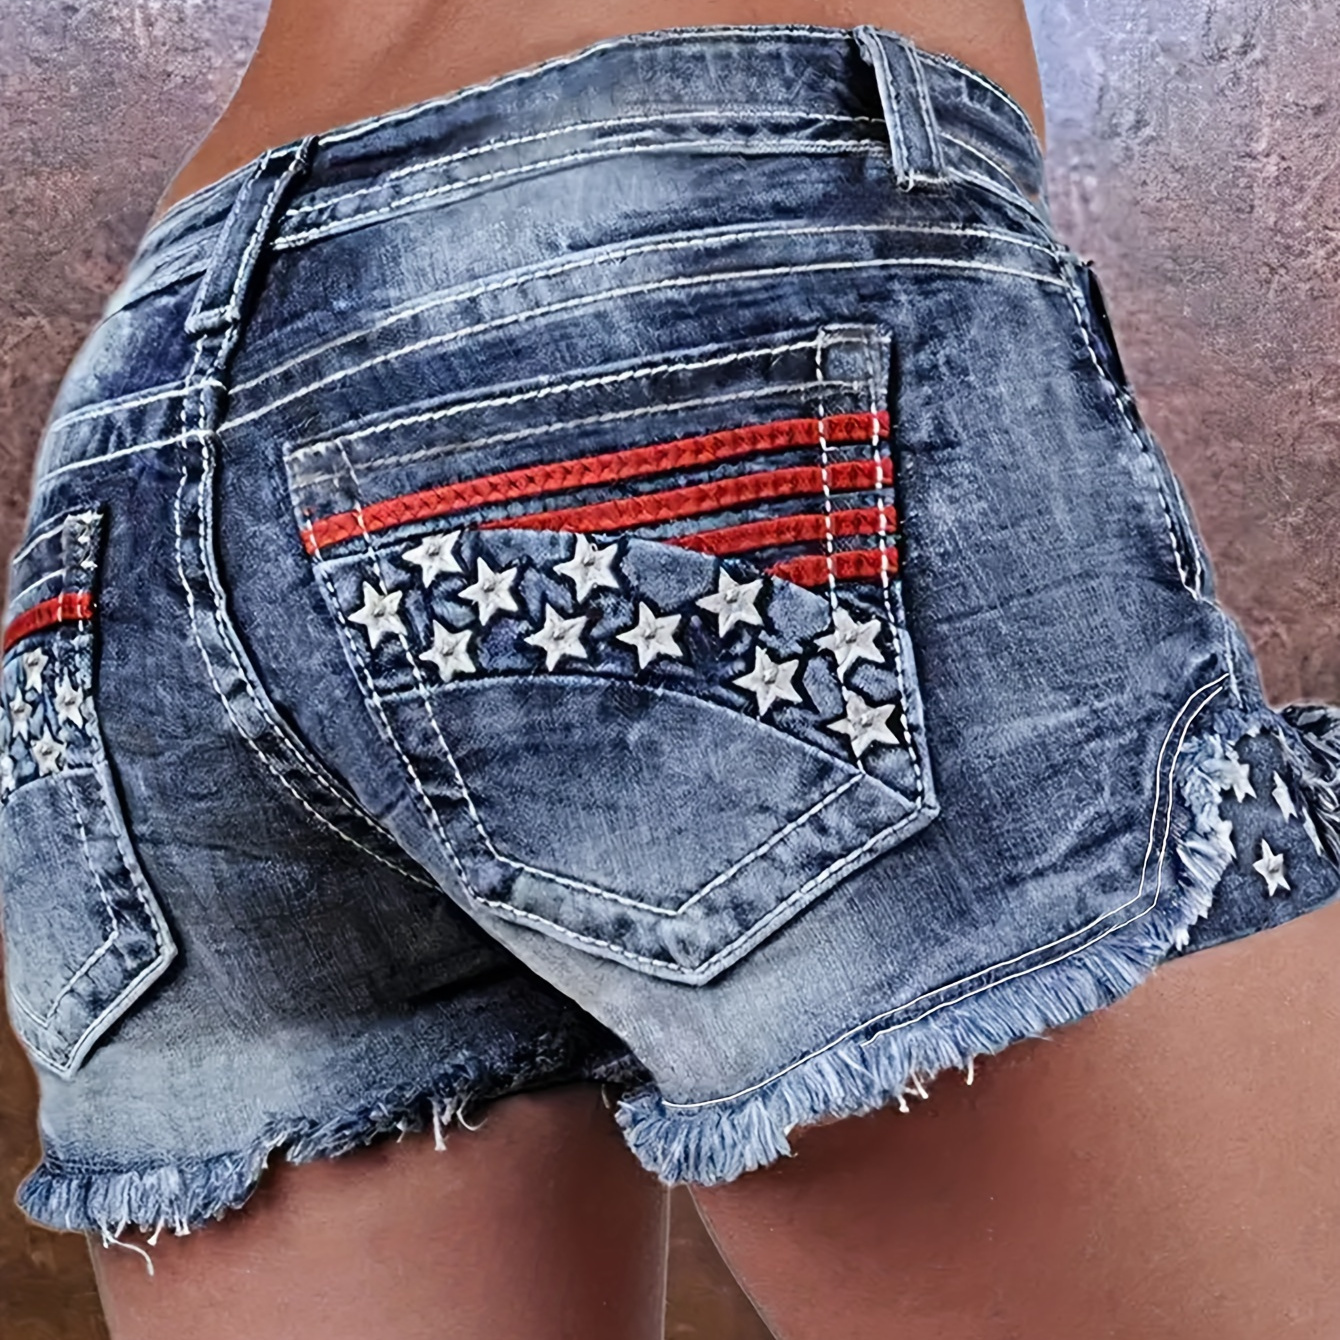 

Women's Distressed Denim Shorts, American Flag Embroidery, Vintage Style, Stretchy, Independence Day Outfit 4th Of July, Frayed Hem, Fashionable Summer Wear